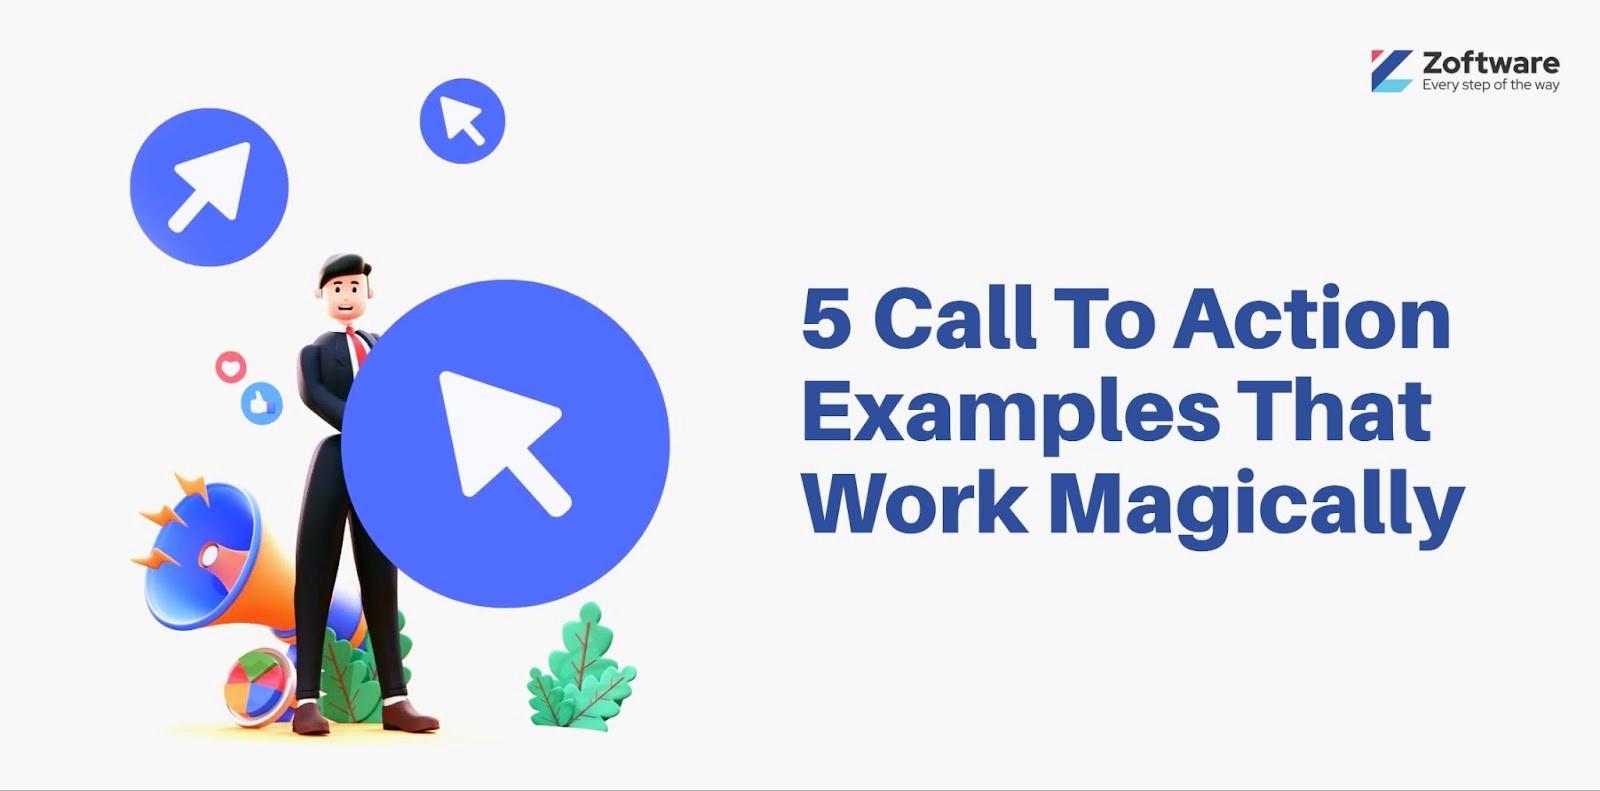 5 Call To Action Examples That Work Magically